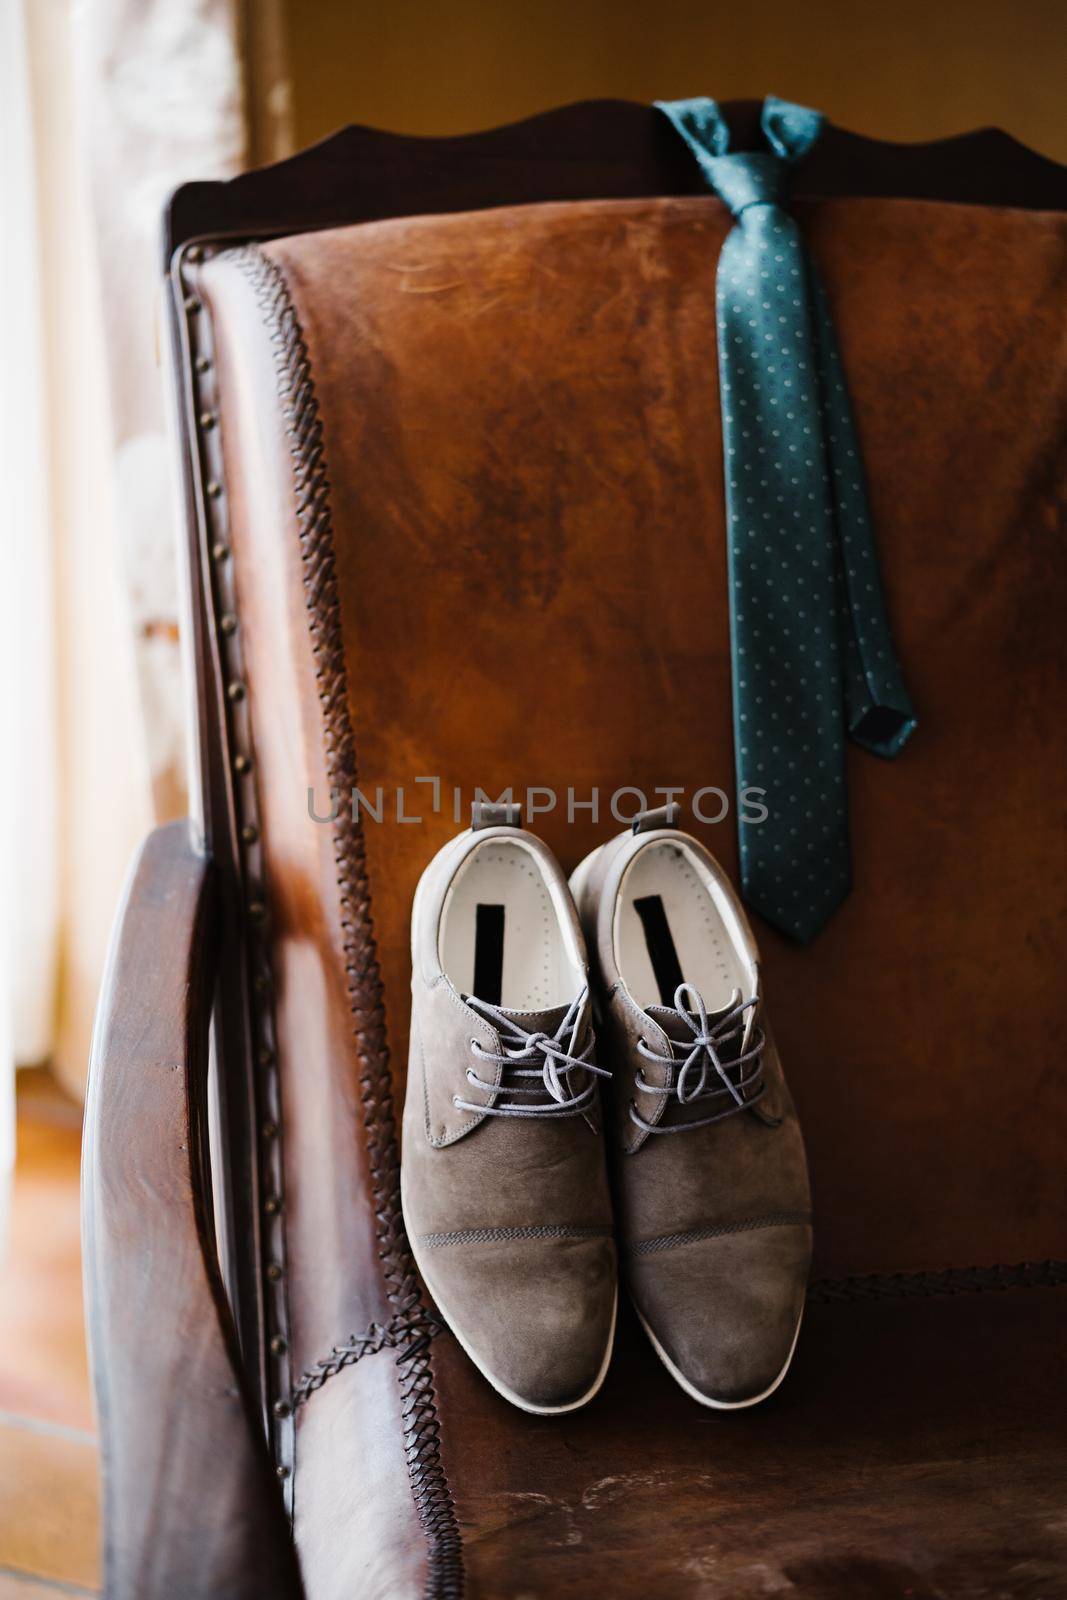 Groom's shoes and polka dot tie on a leather chair in the room. by Nadtochiy